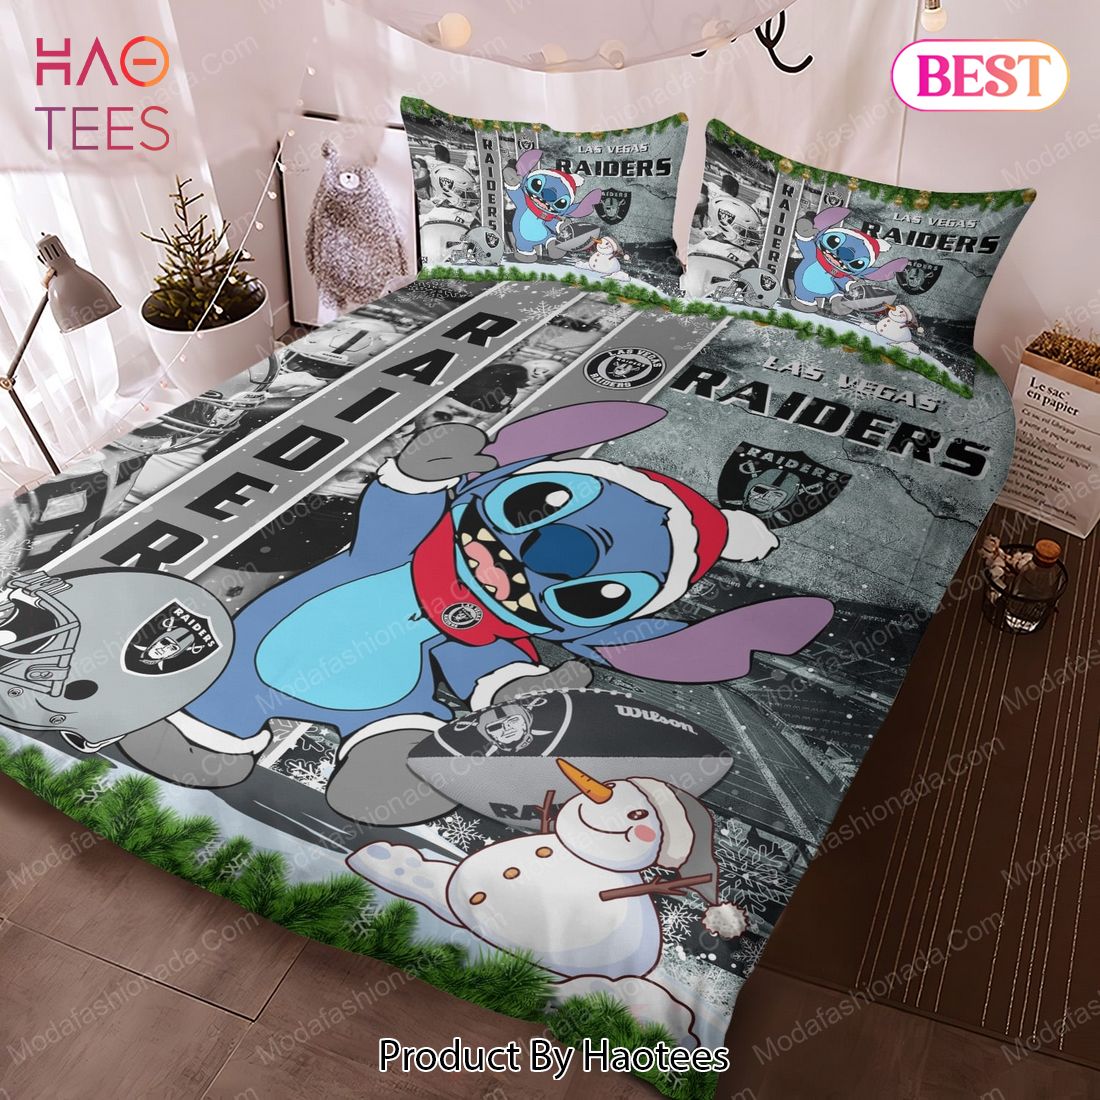 Buy Stitch Louis Vuitton Christmas Bedding Sets Bed Sets, Bedroom